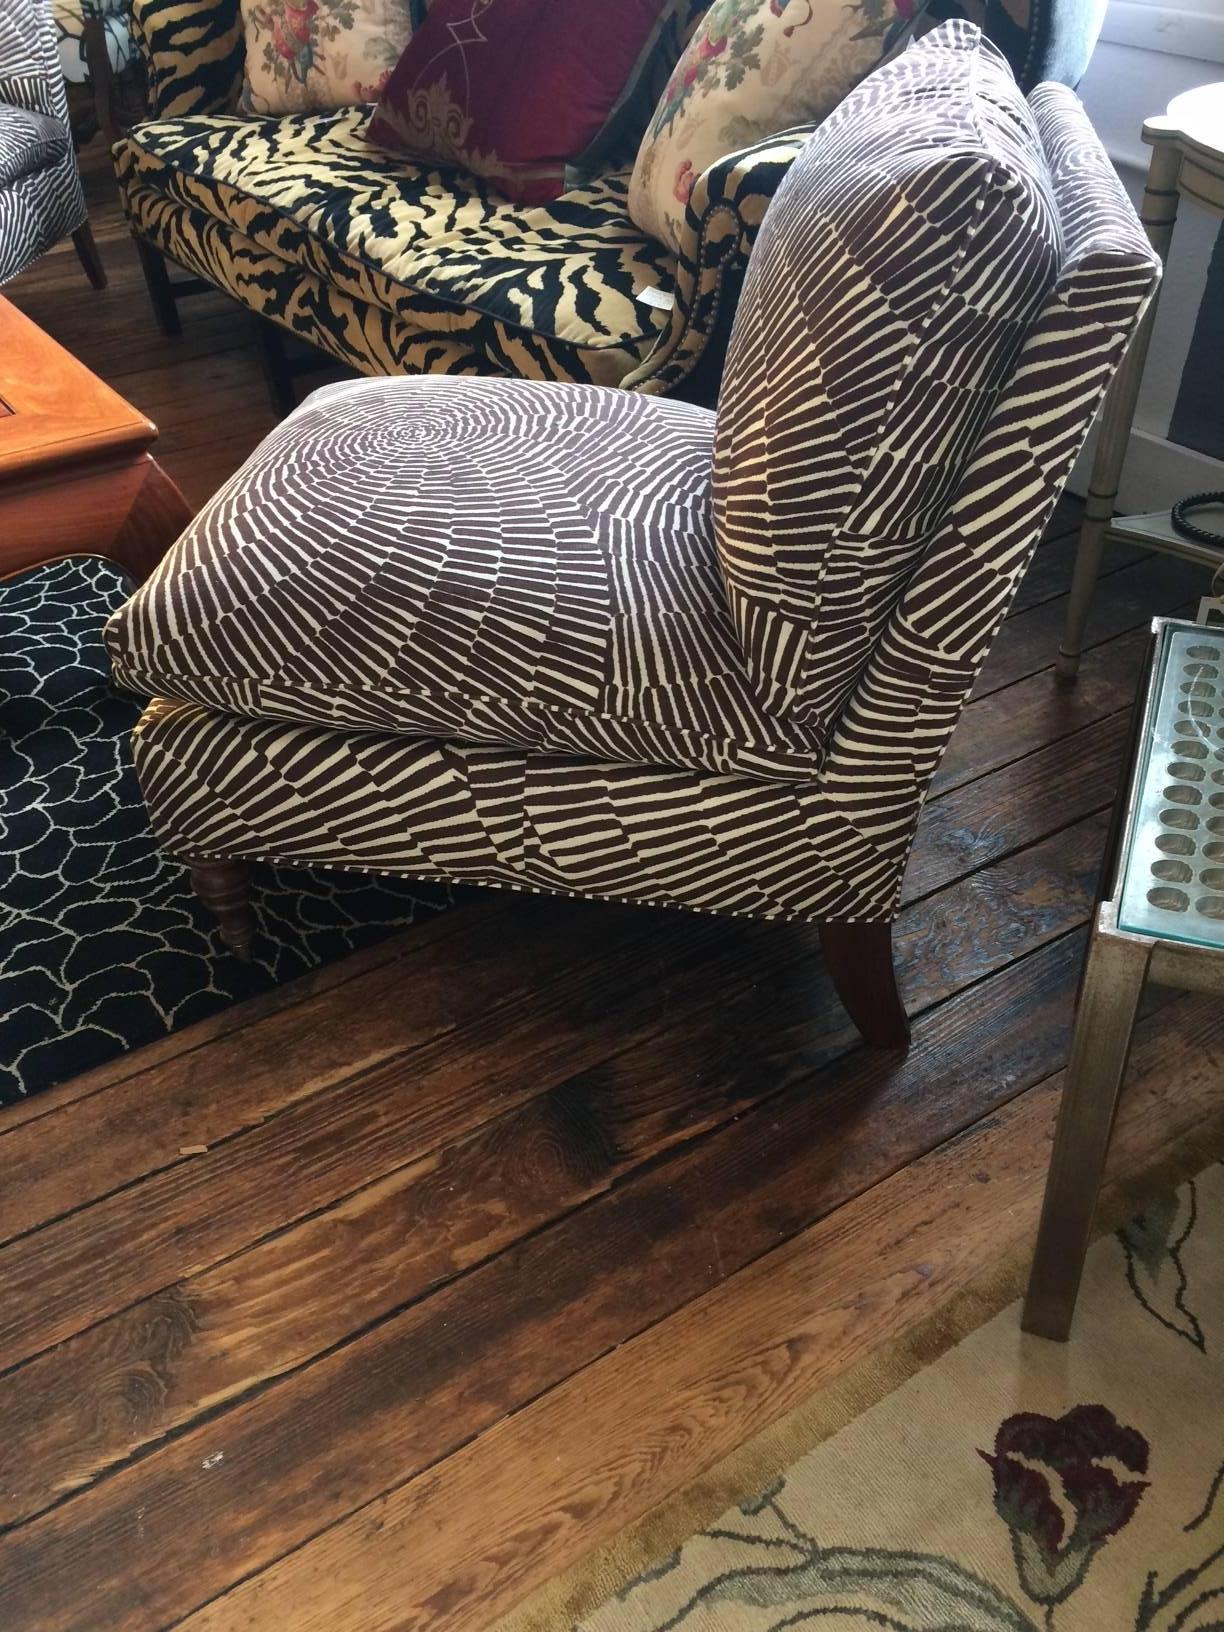 American Stunning Pair of Brown and White Patterned Slipper Chairs